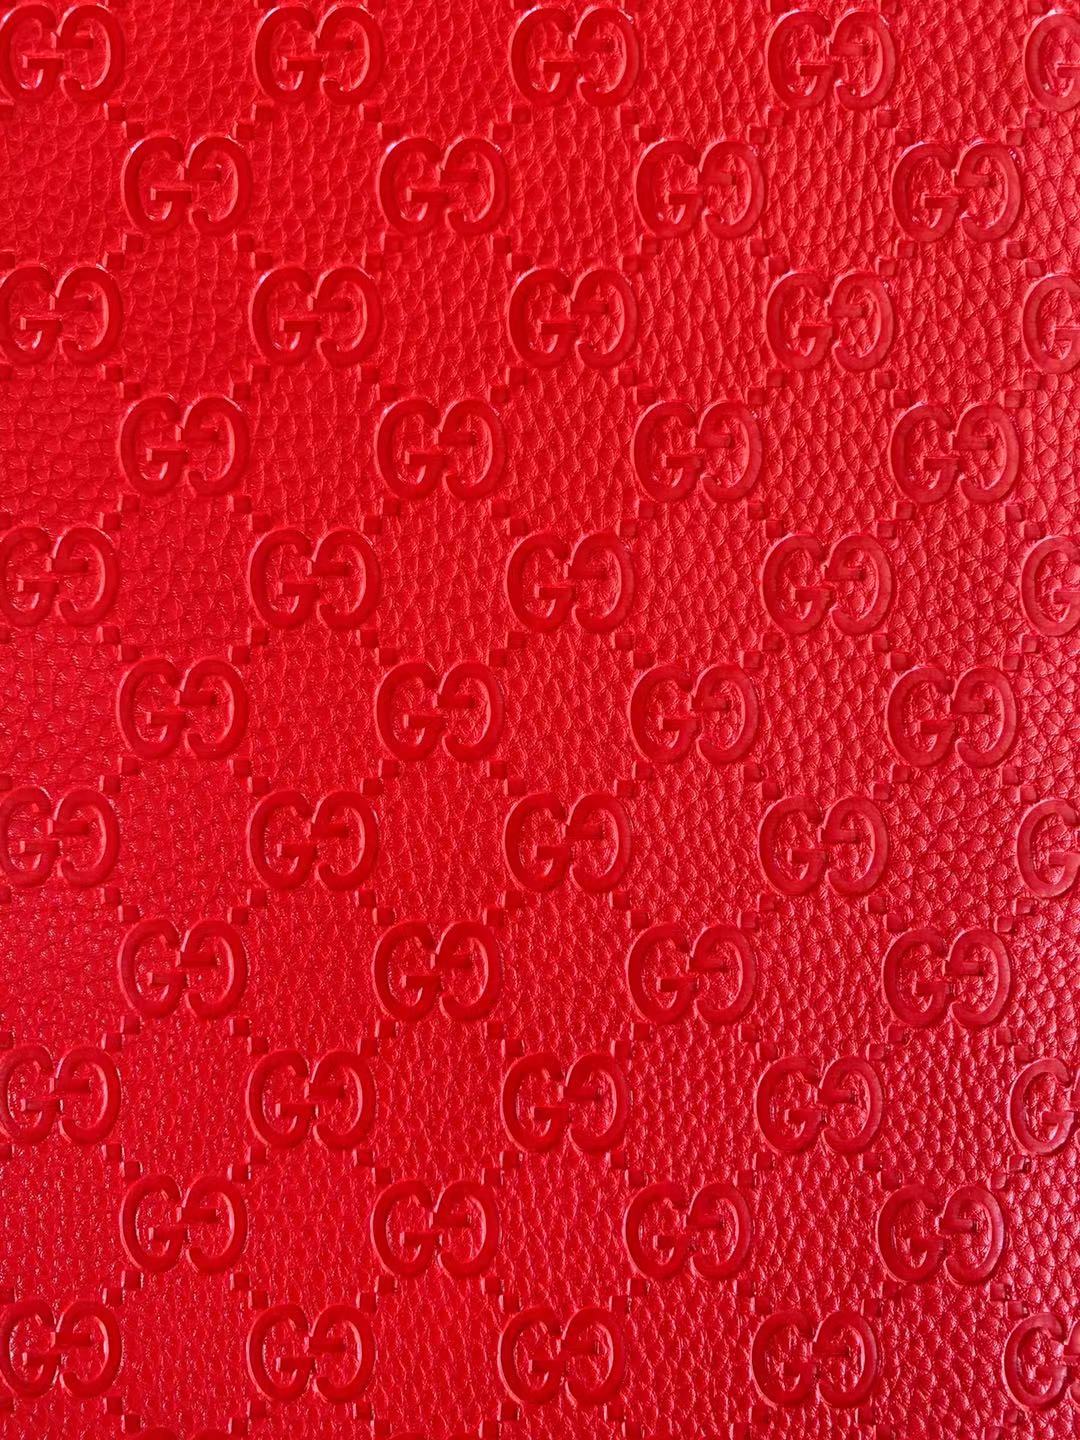 Classic Gucci Embossed Craft Leather Fabric Shoes Leather , Bags Leather Fabric By Yards (Red)